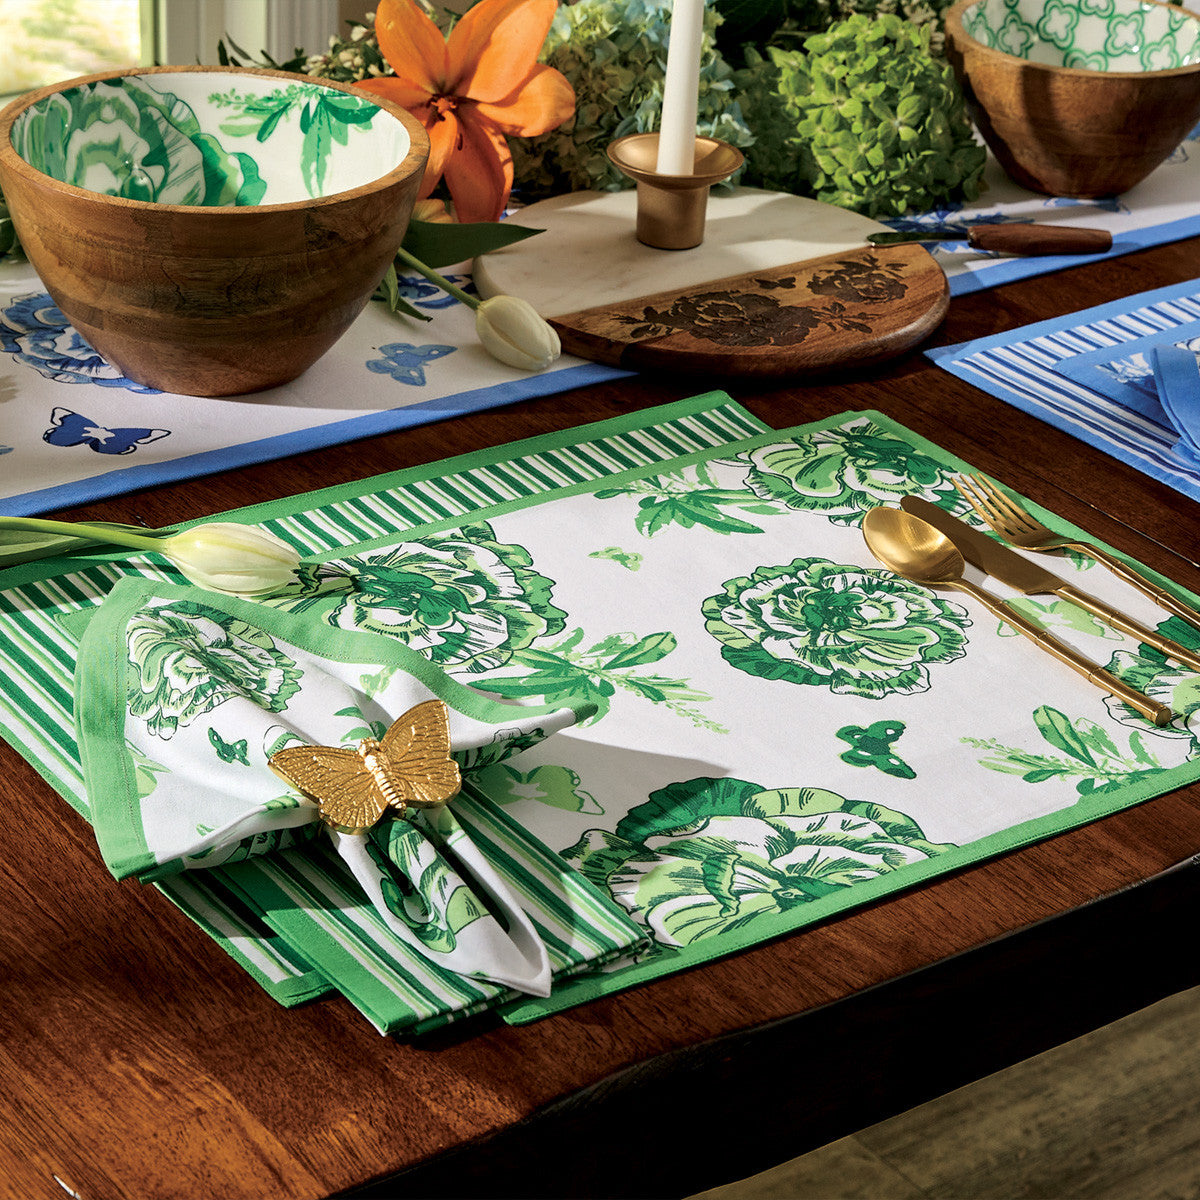 Patricia Heaton Home Florals And Flitters Reversible Placemat Green Set of 12 Park Designs